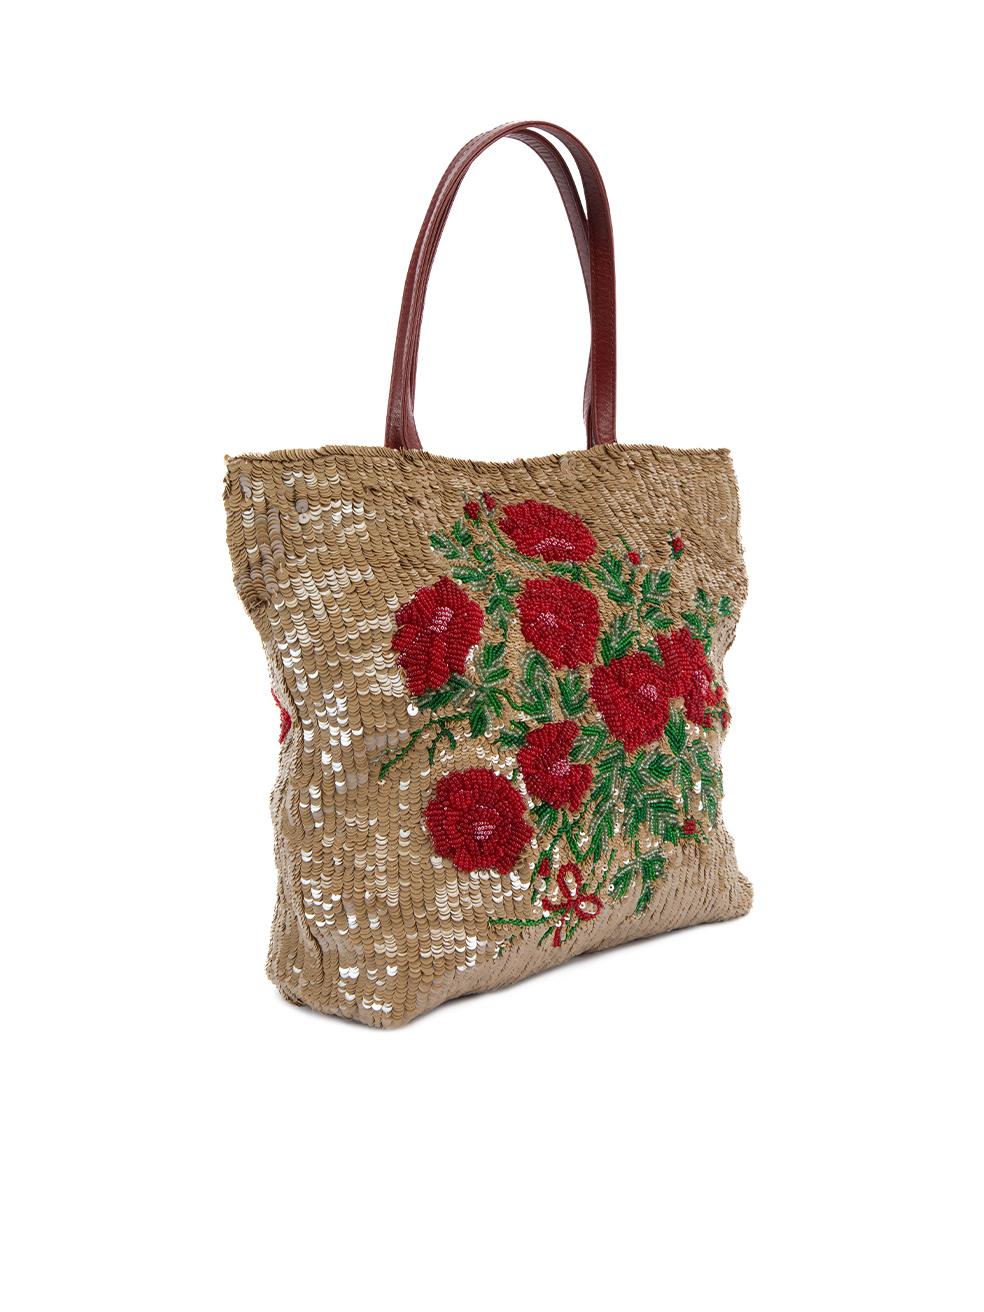 CONDITION is Very good. Hardly any visible wear to bag is evident. Very few loose threads can be seen on this used Valentino Garavani designer resale item. Details Brown and red Sequins Medium tote bag Floral beaded design 2x Red leather top handle